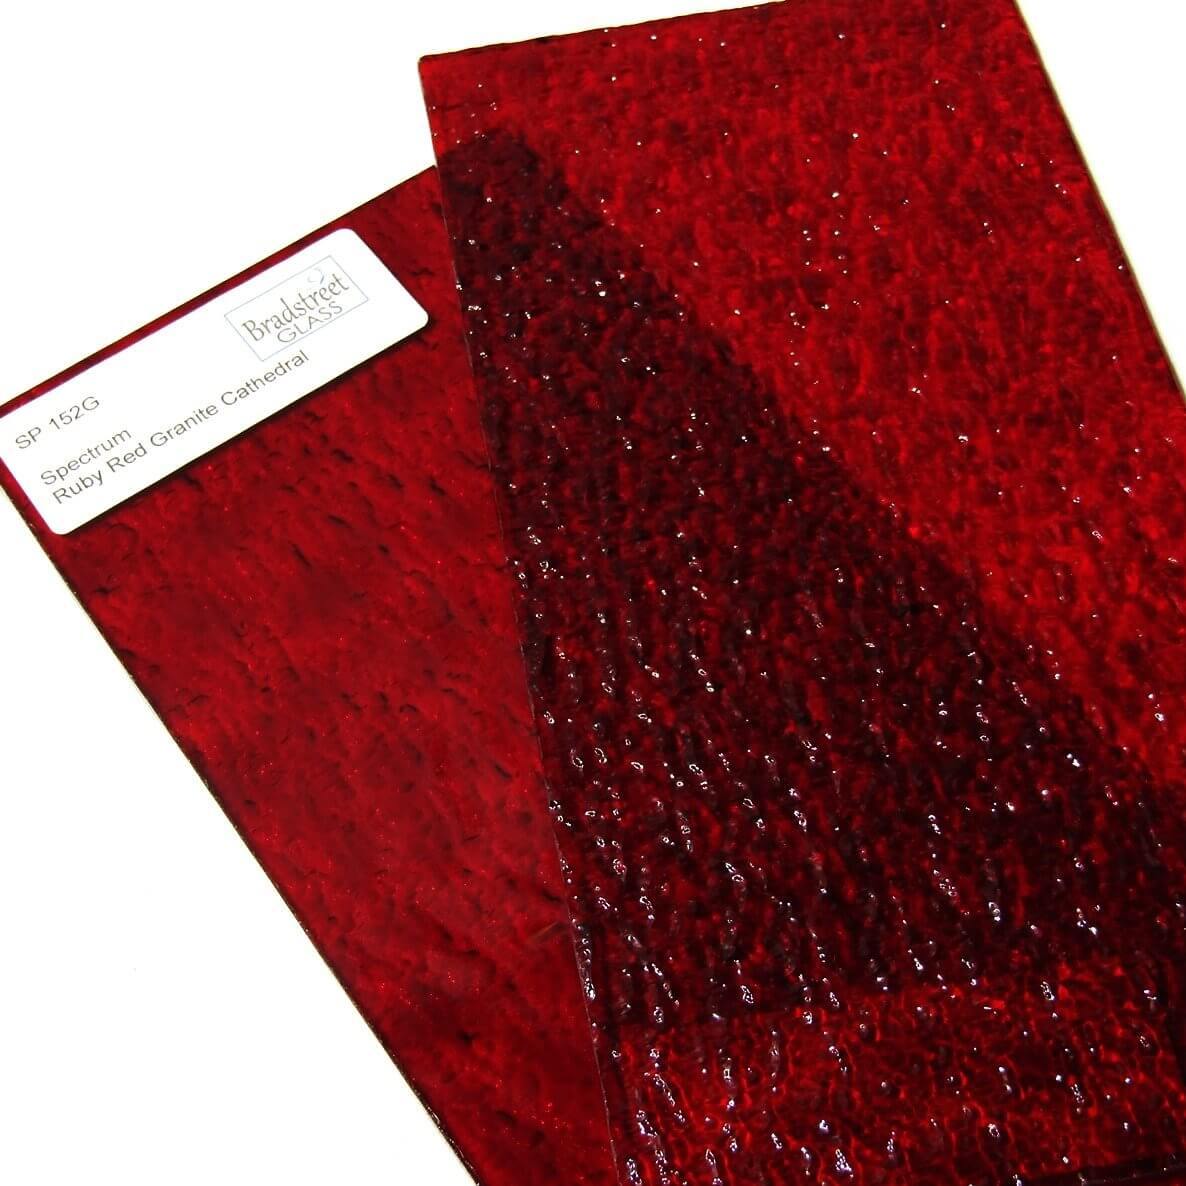 Spectrum Ruby Red Granite Cathedral Textured Translucent Stained Glass Sample Size SP 152G